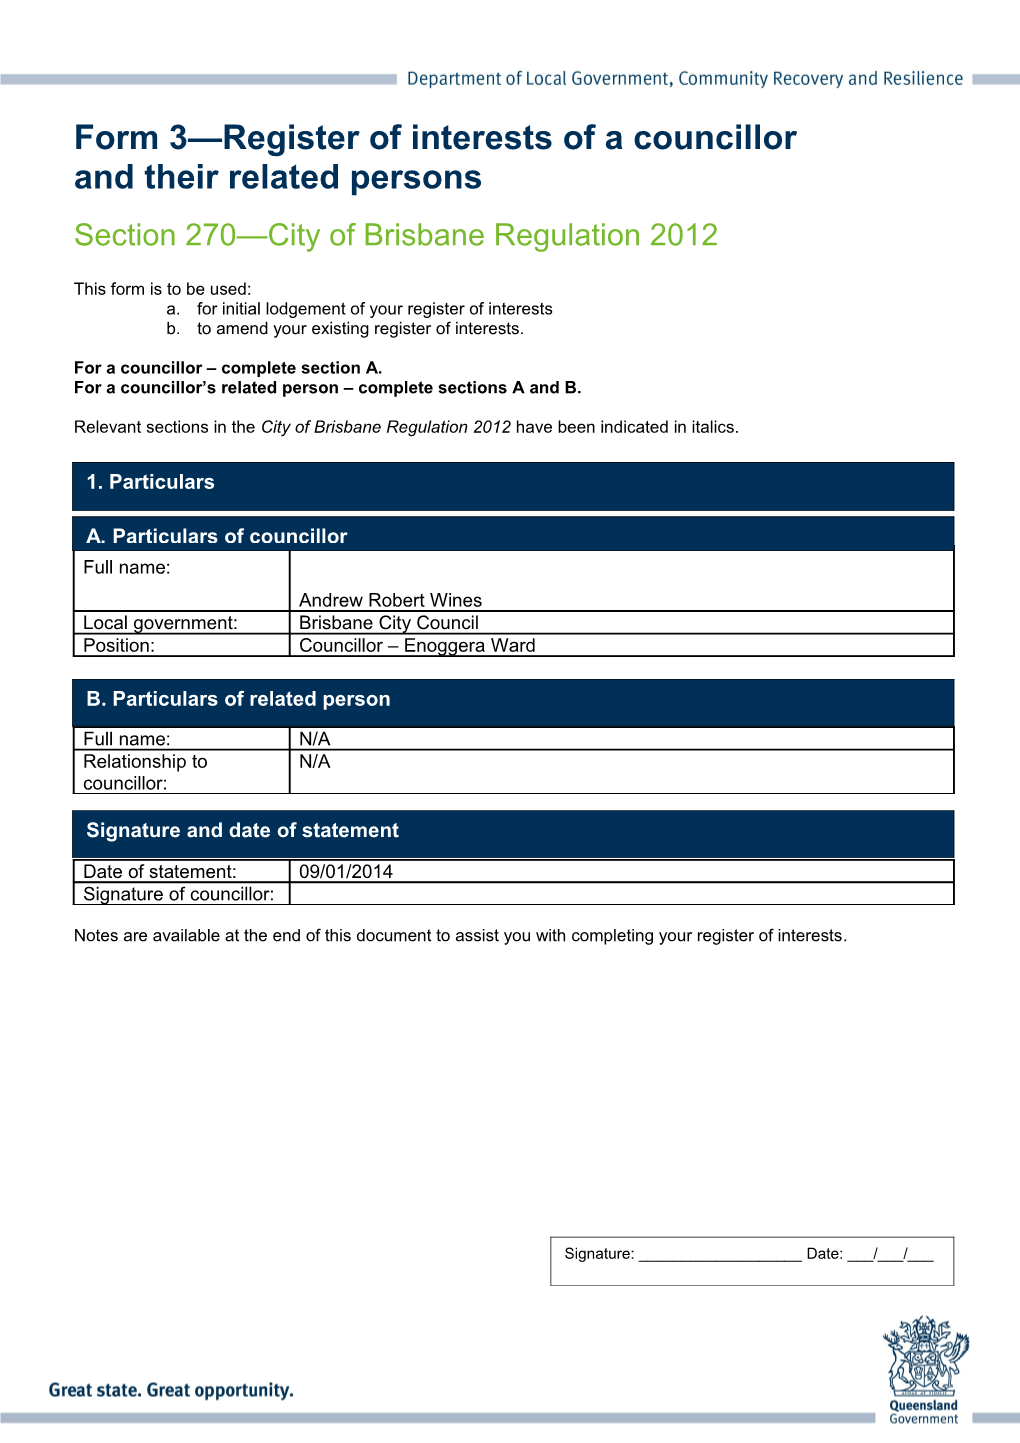 Form 3 - Register of Interests of a Councillor and Their Related Persons s1